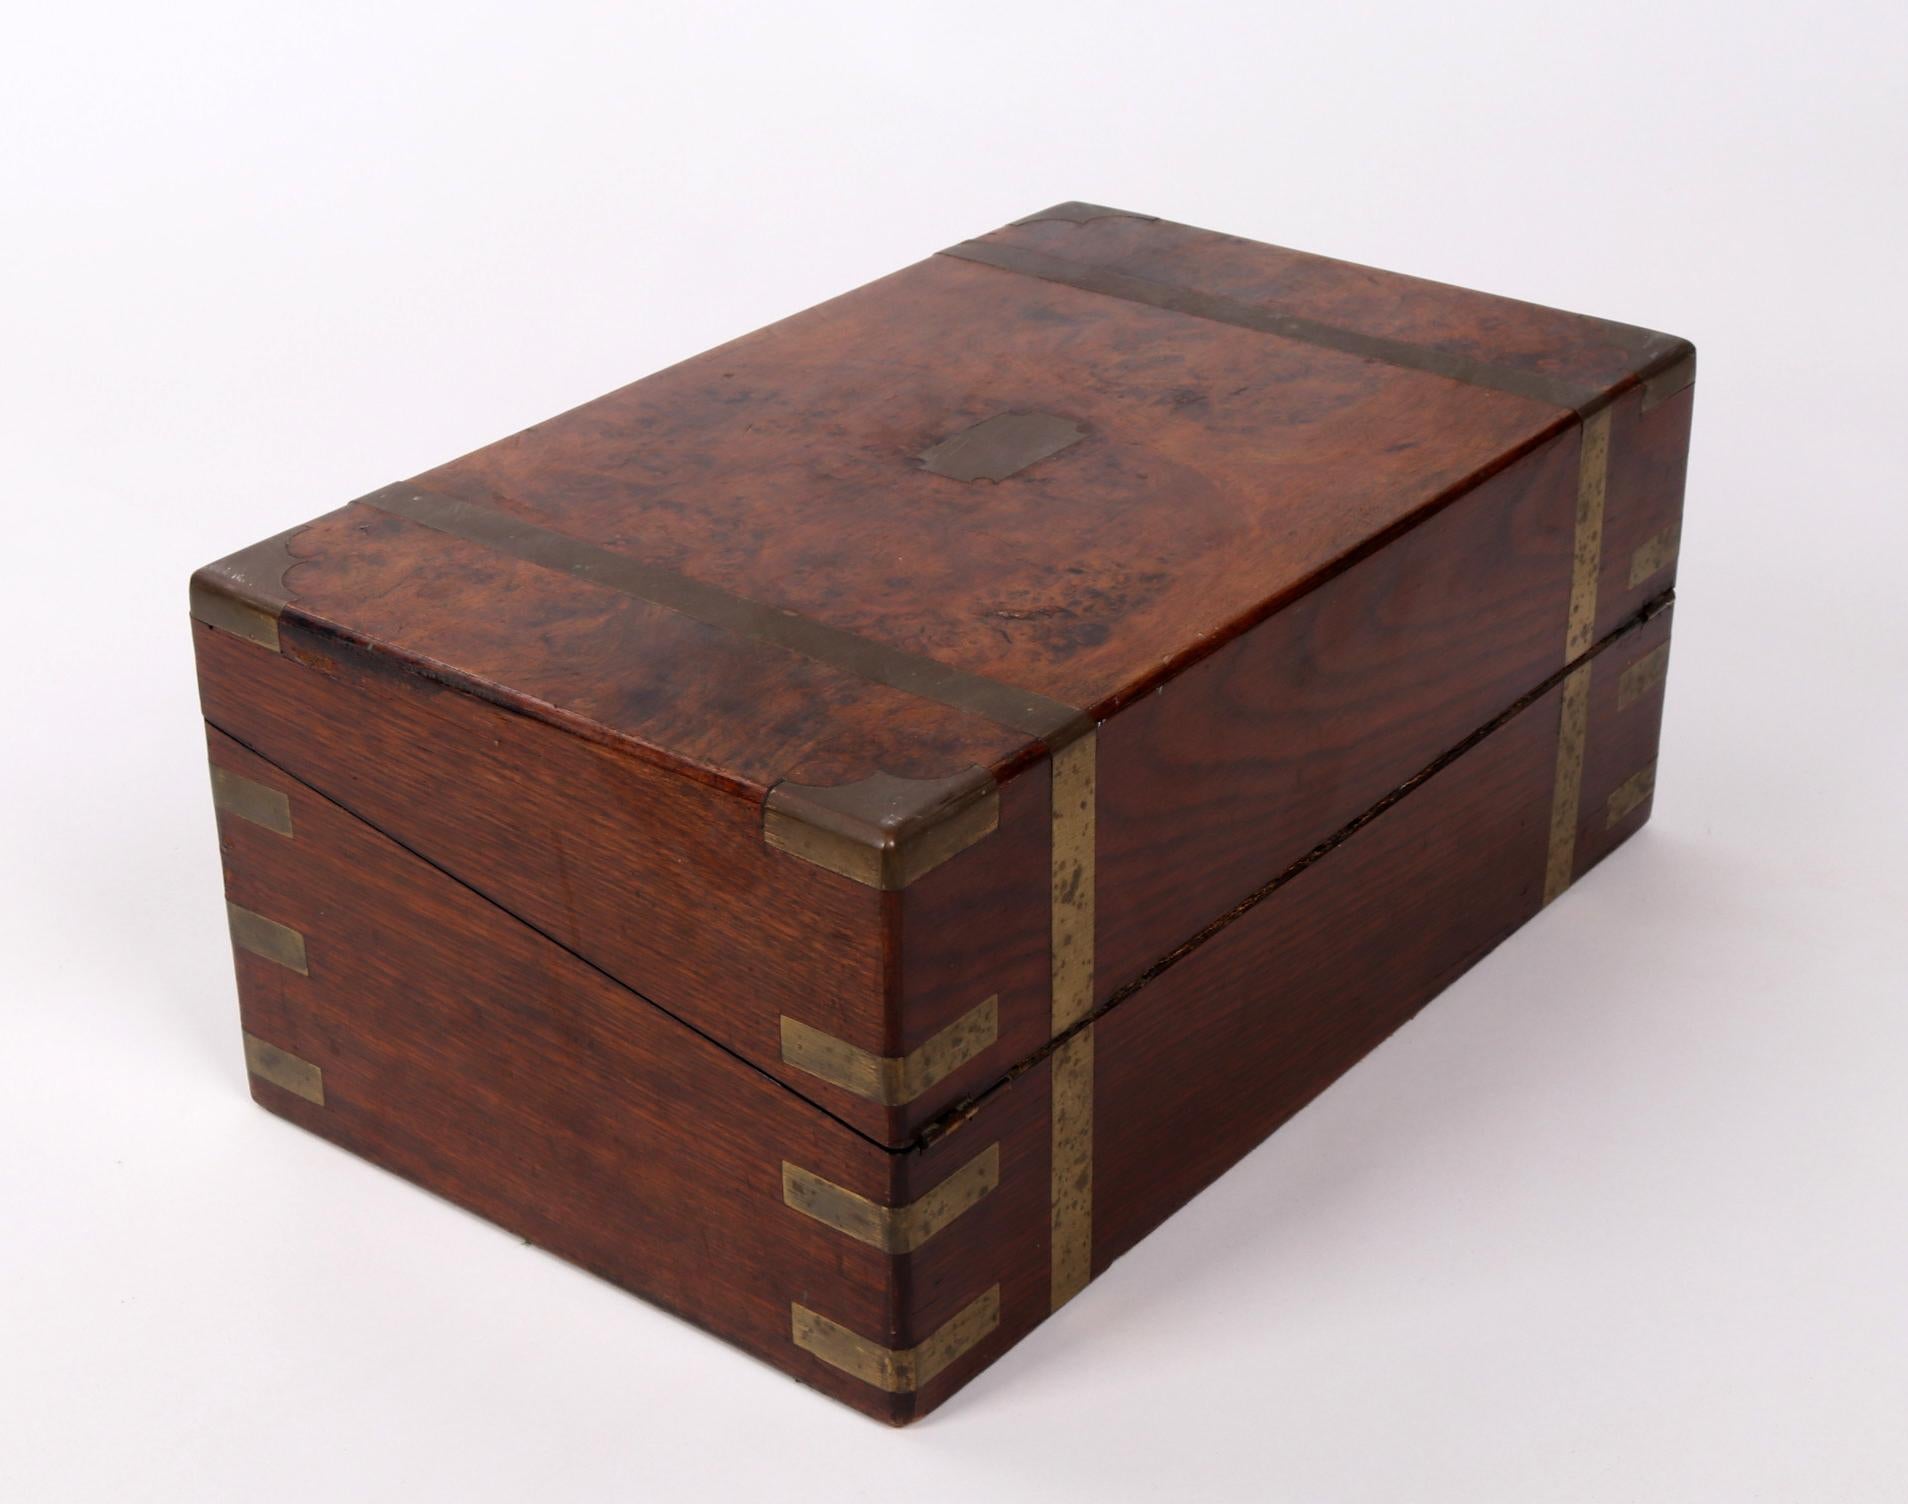 19th Century English Rootwood Office Box with Brass Fittings and Leather Interior